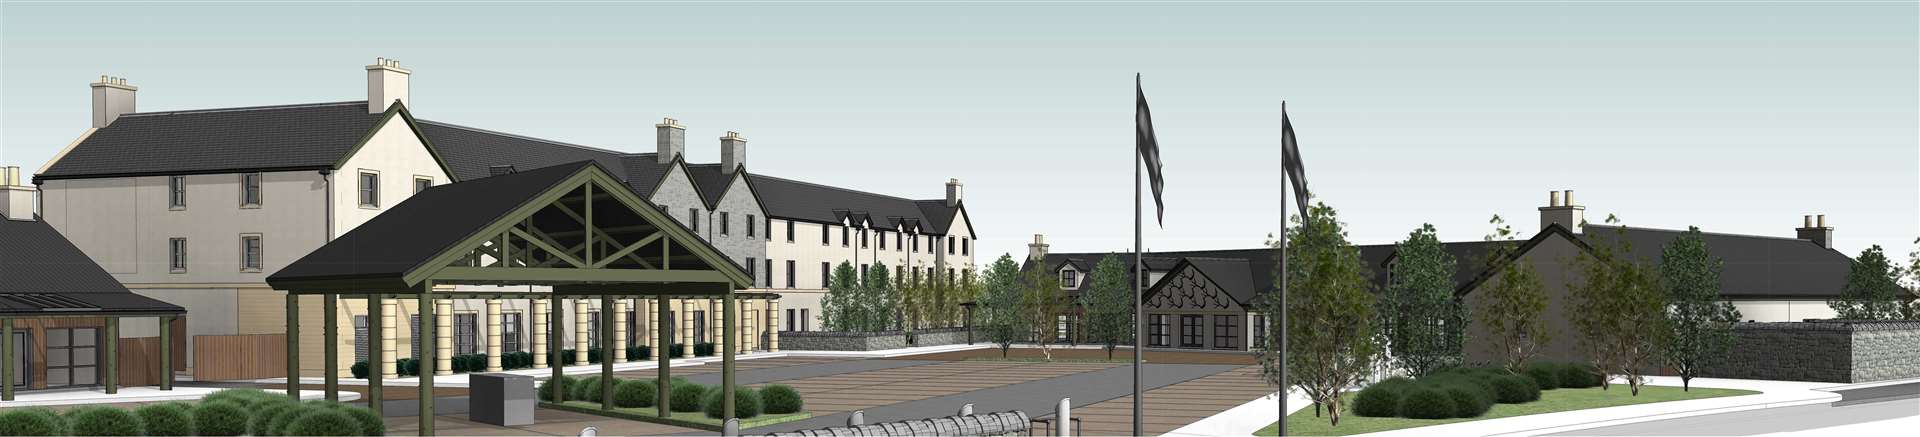 Artwork showing the proposed Tomatin Trading Company development.